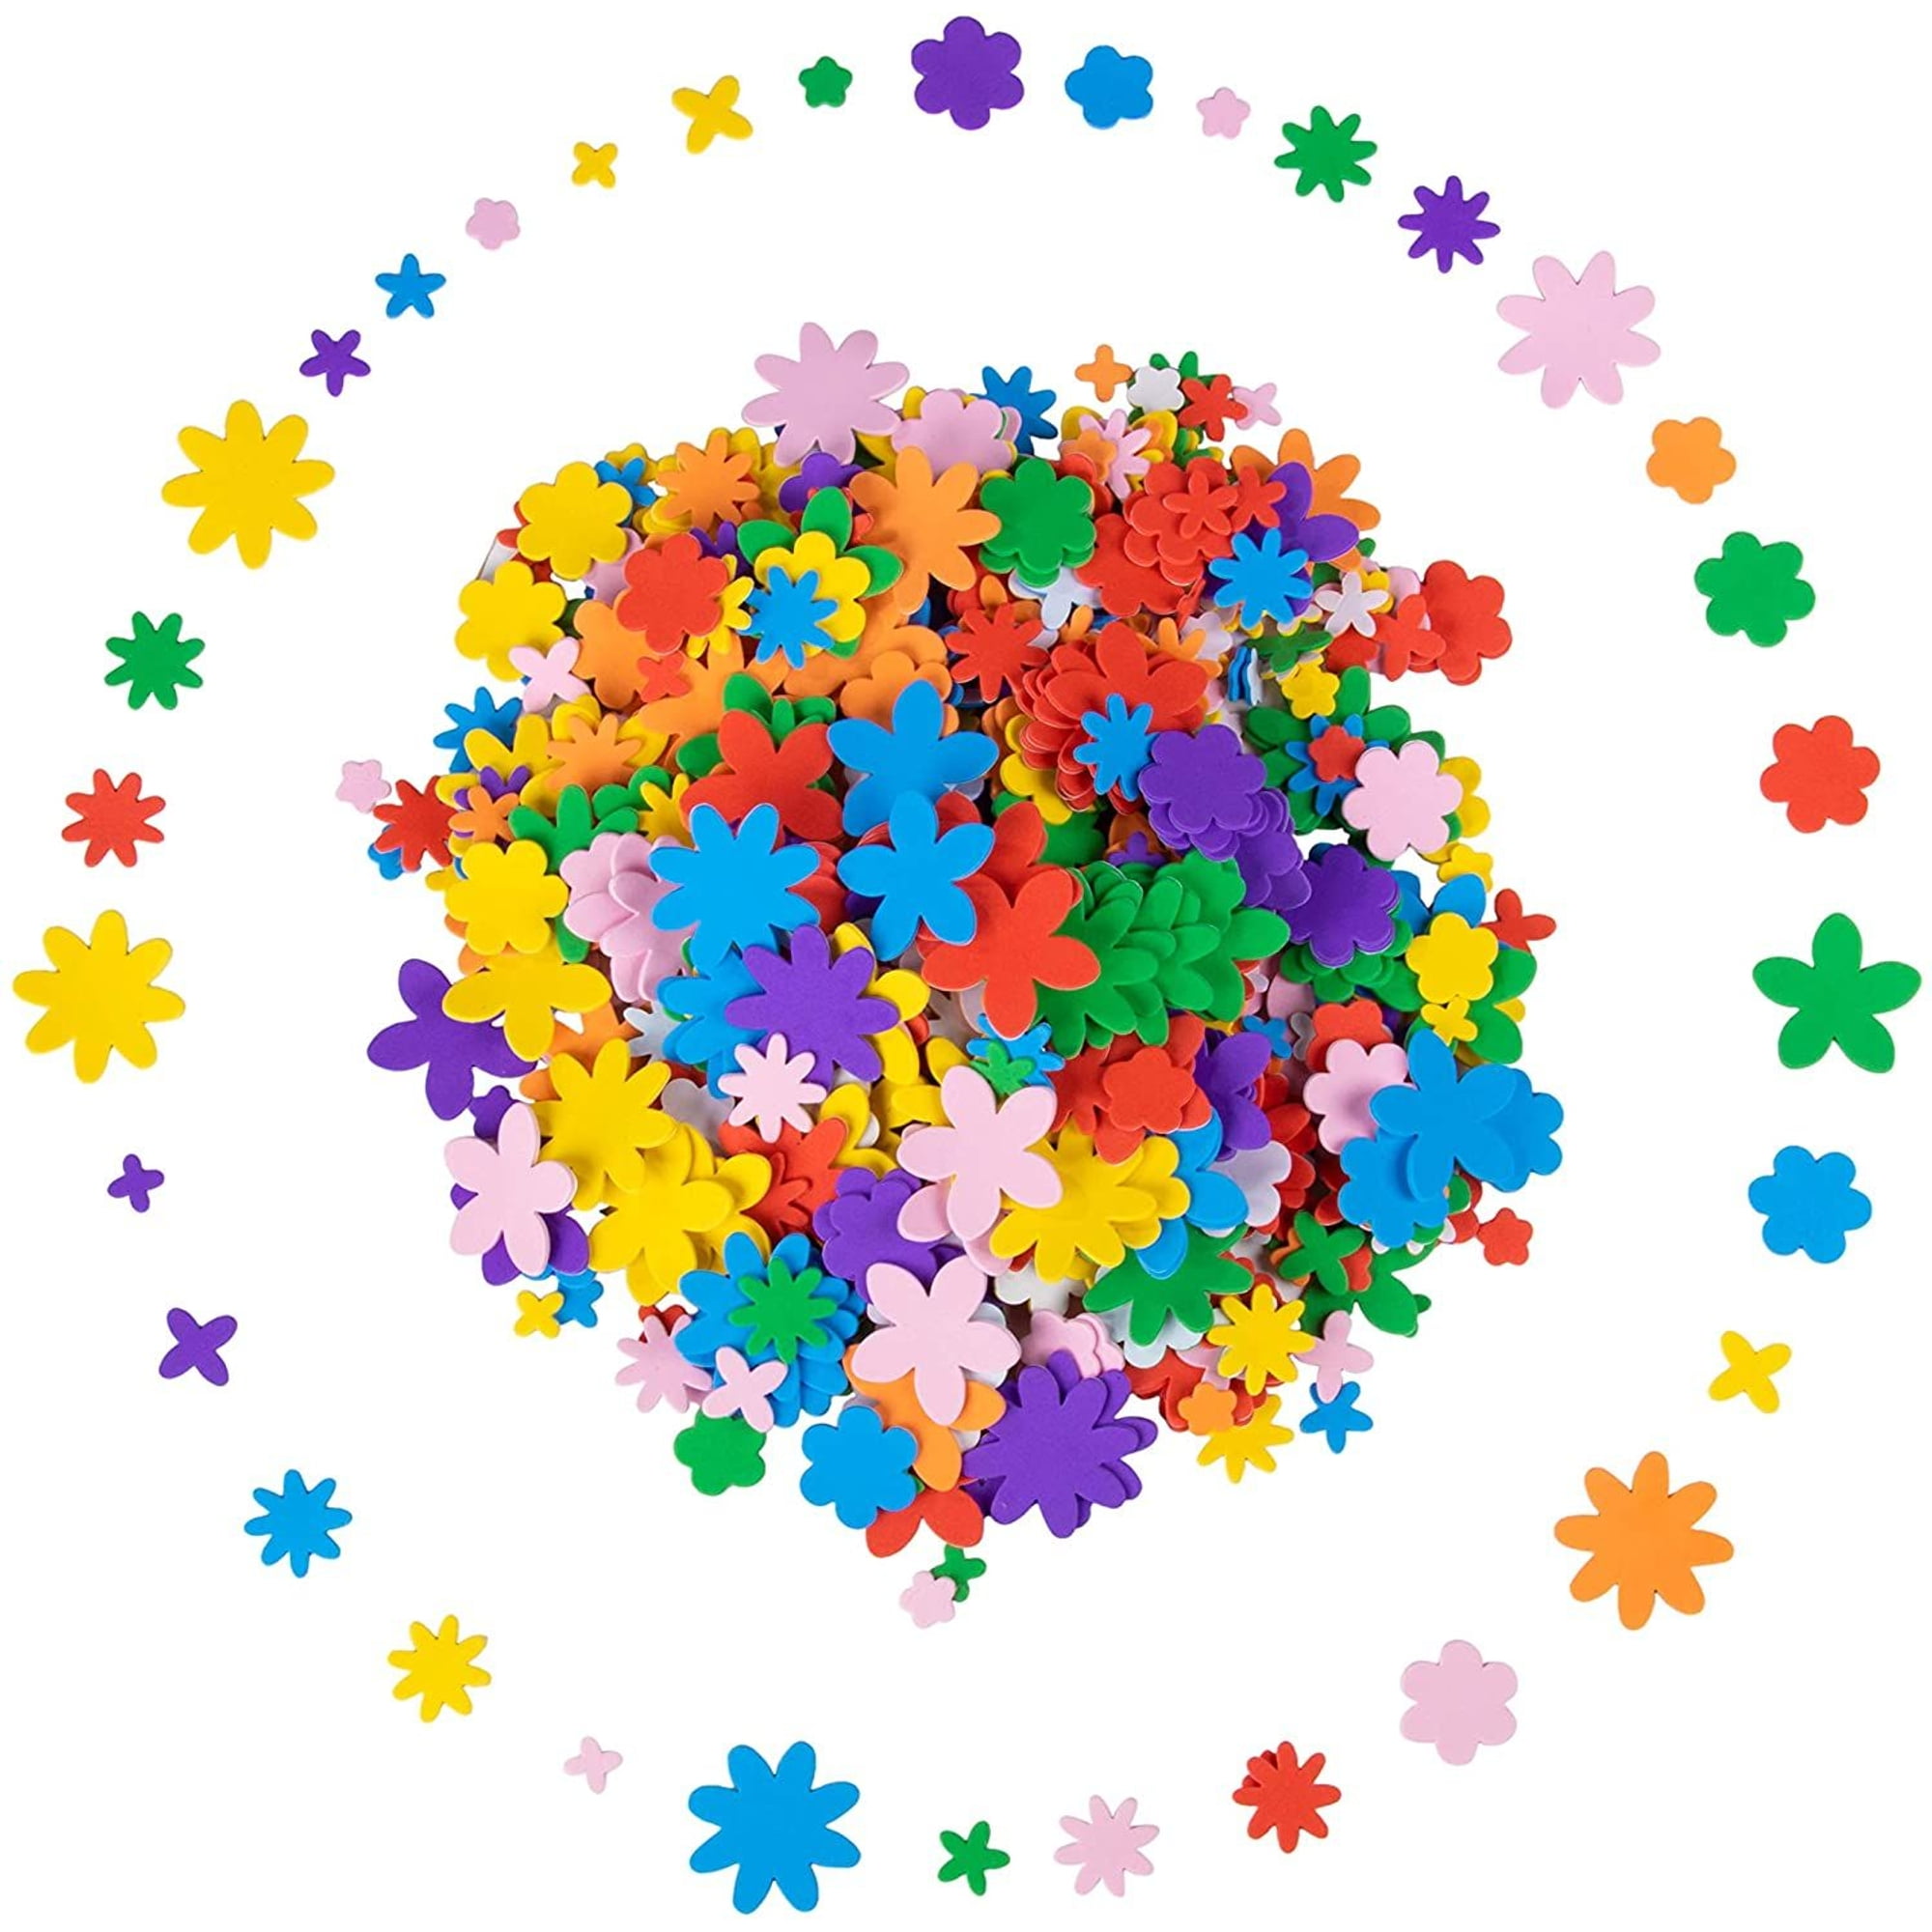 Foam Stickers - 700-Piece Self-Adhesive Foam Shapes, Flower Shape Kids DIY Arts and Crafts Supplies, Multicolored